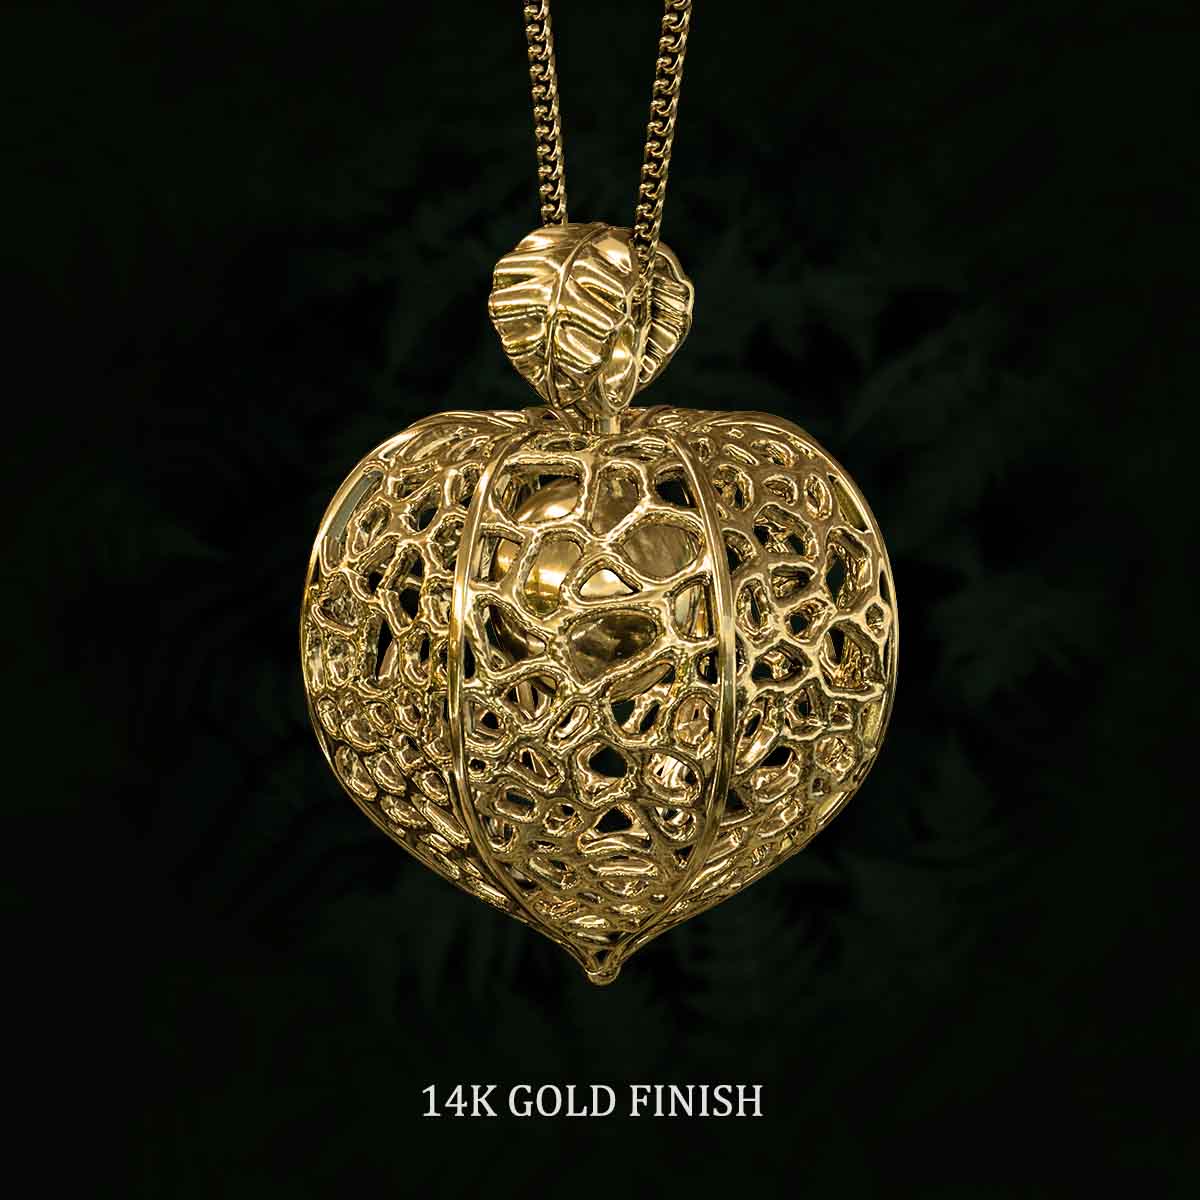     14k-Gold-Finish-Chinese-Lantern-Plant-Pendant-Jewelry-For-Necklace